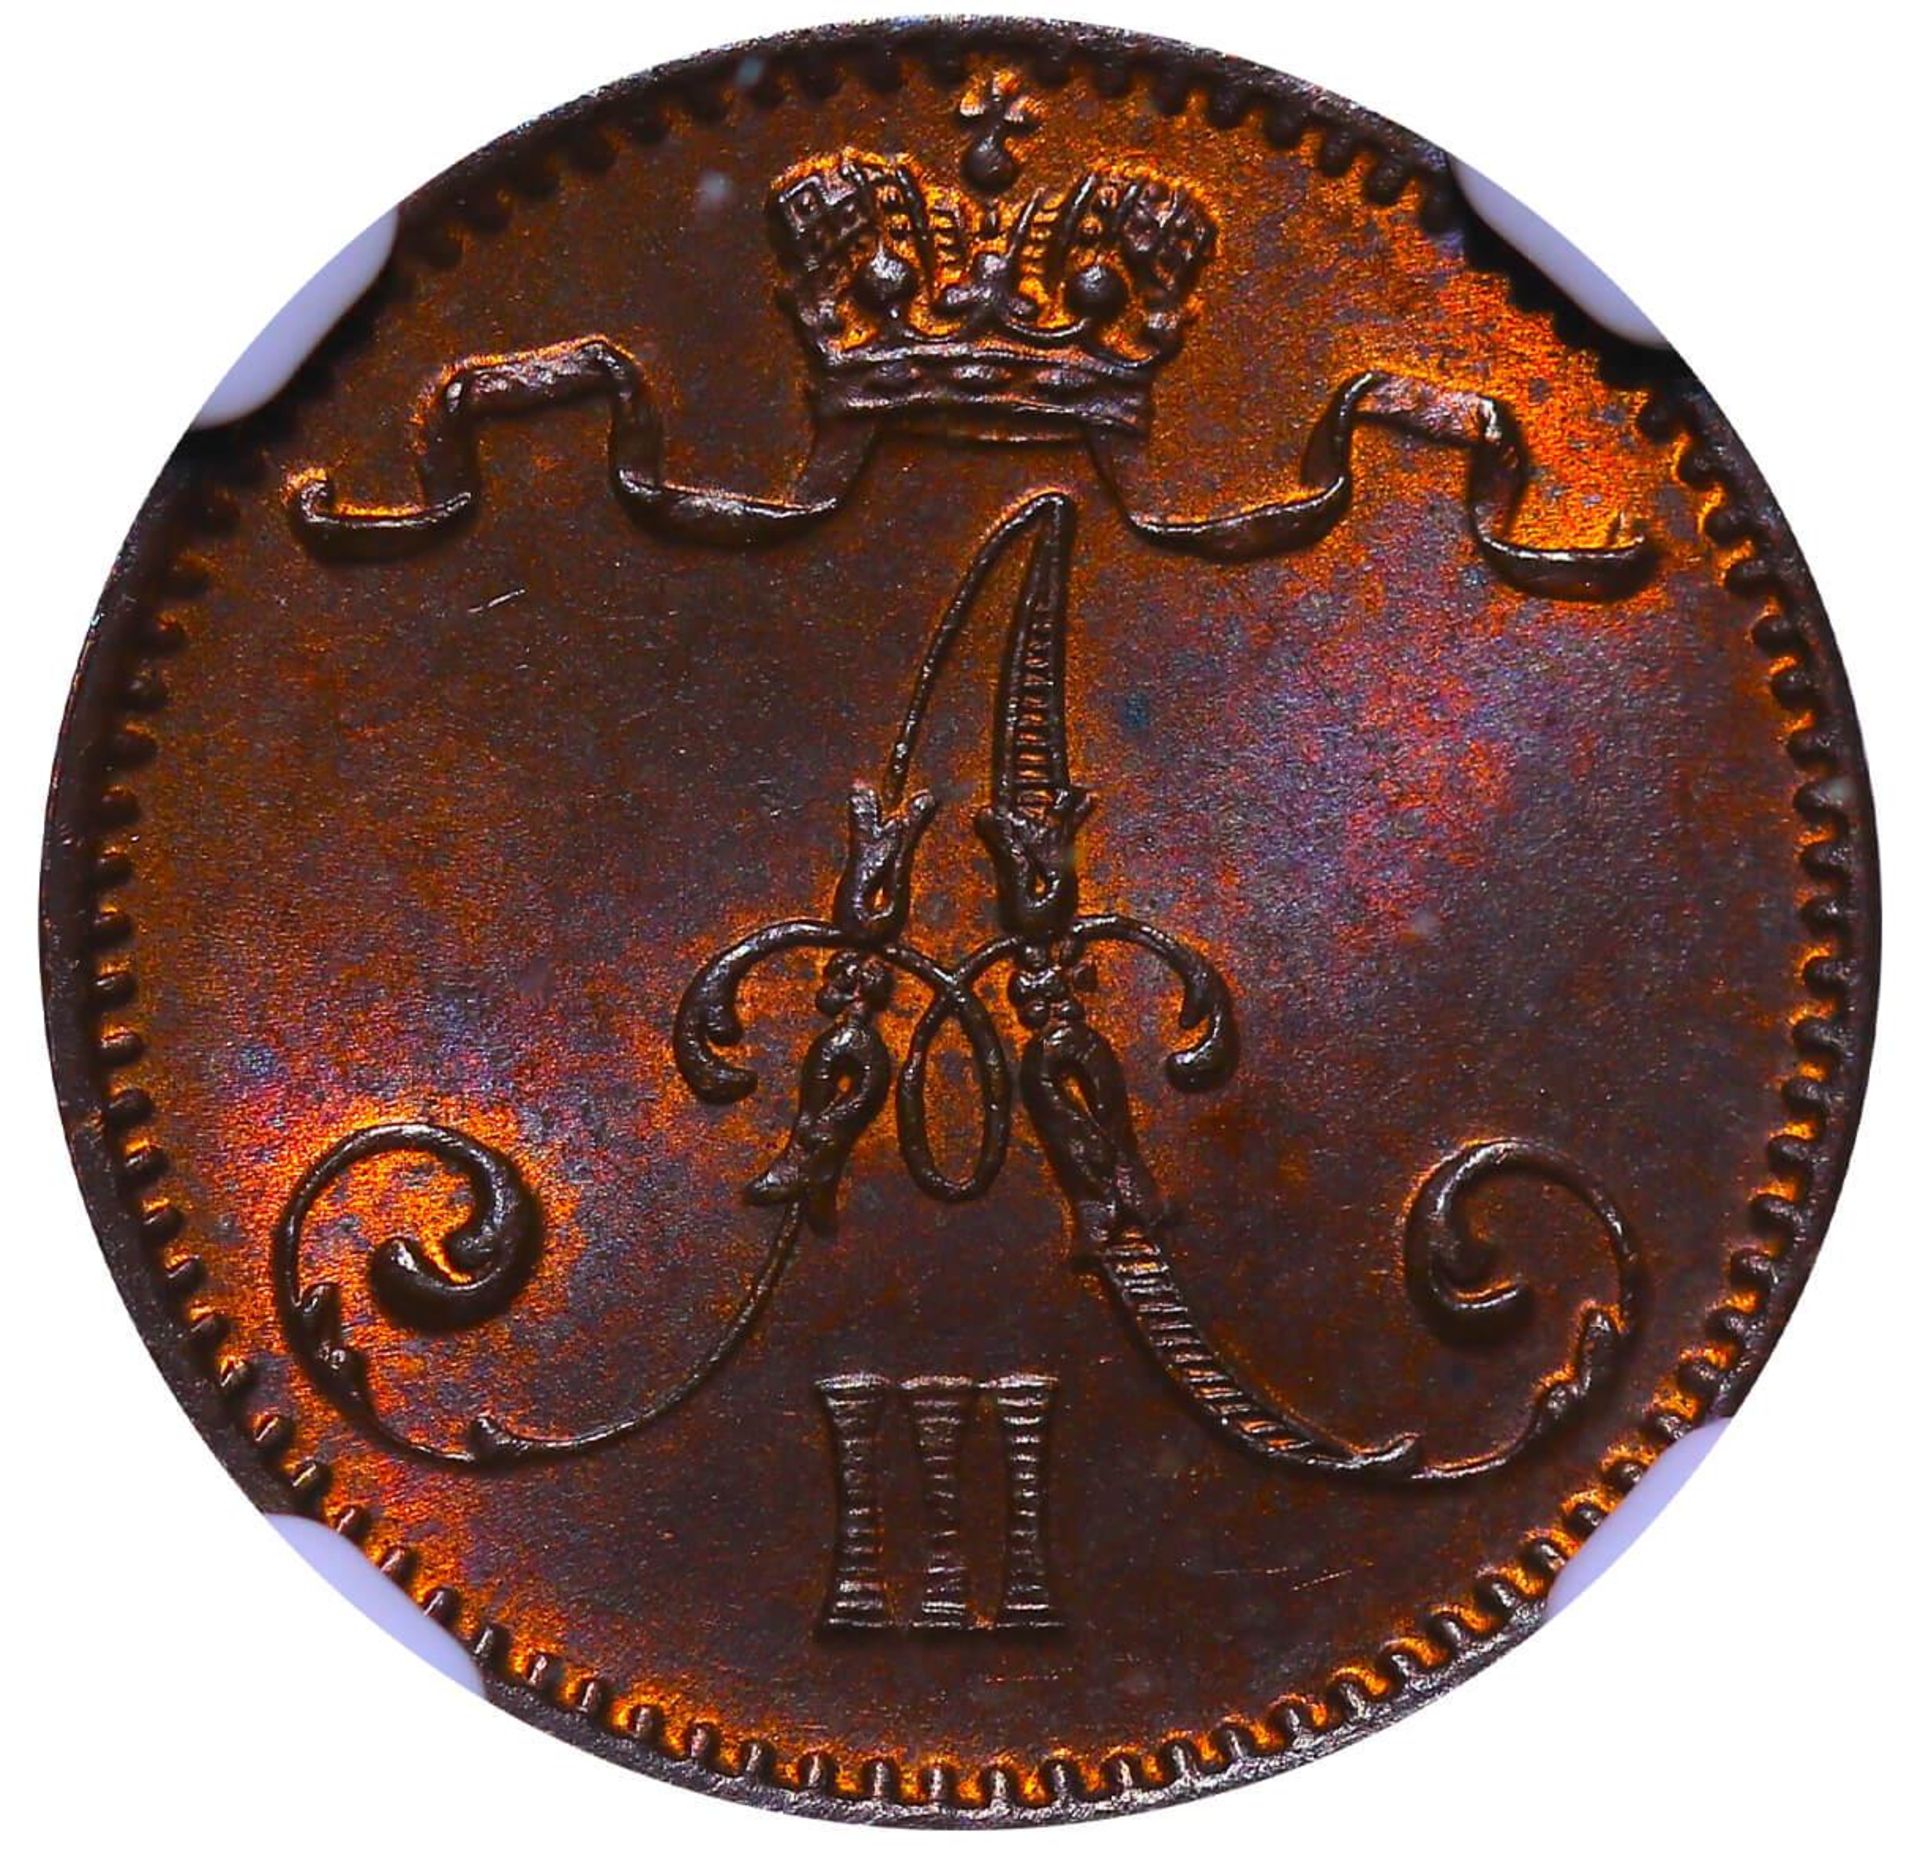 Russian Empire, 1 Penni, 1892 year, NGC, MS 64 BN - Image 2 of 3